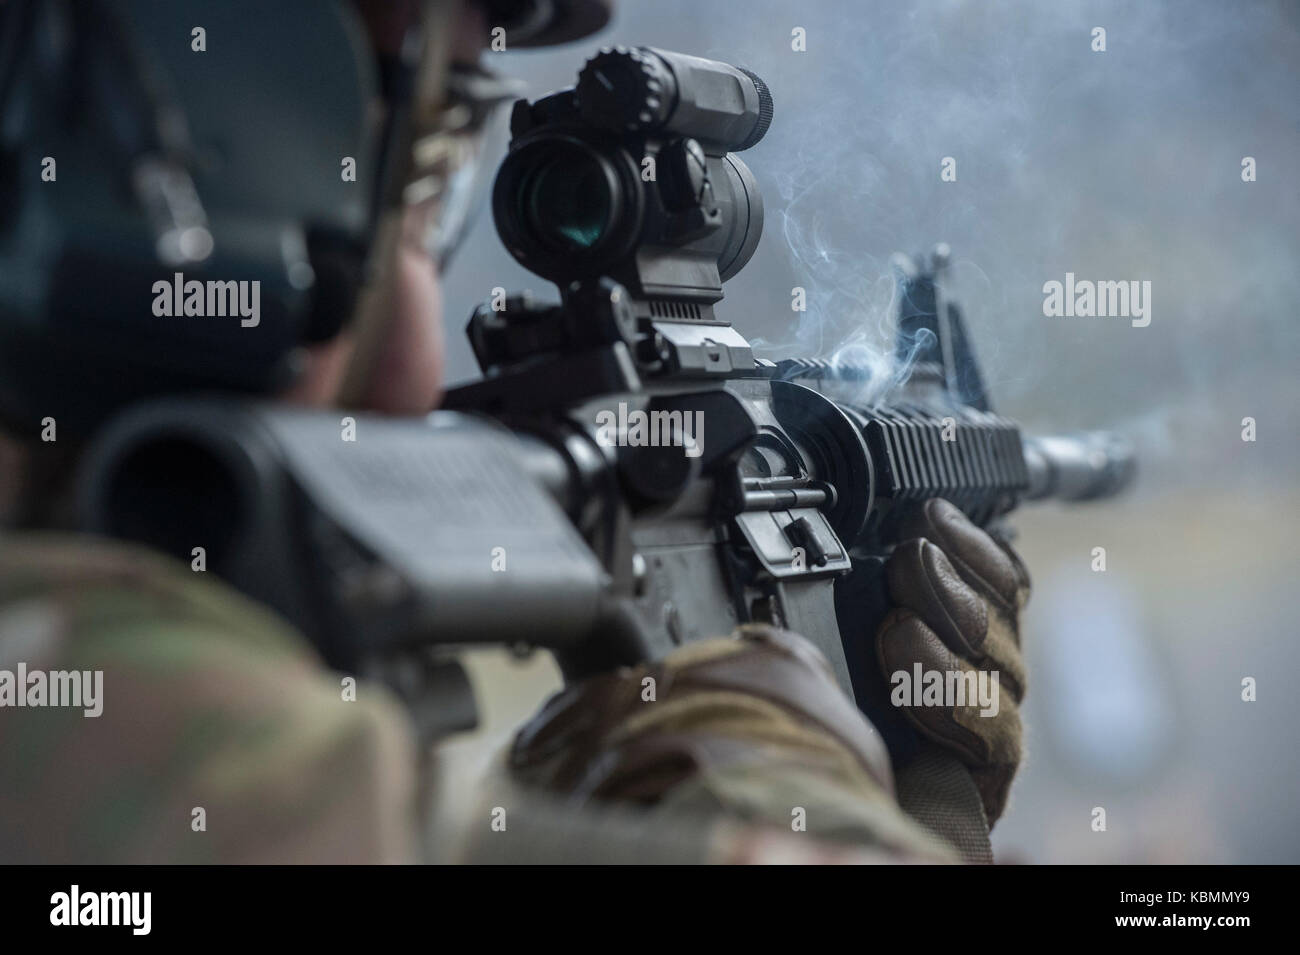 Smoke emanates from U.S. Air Force Senior Airman’s M4 carbine during live-fire sustainment training Stock Photo